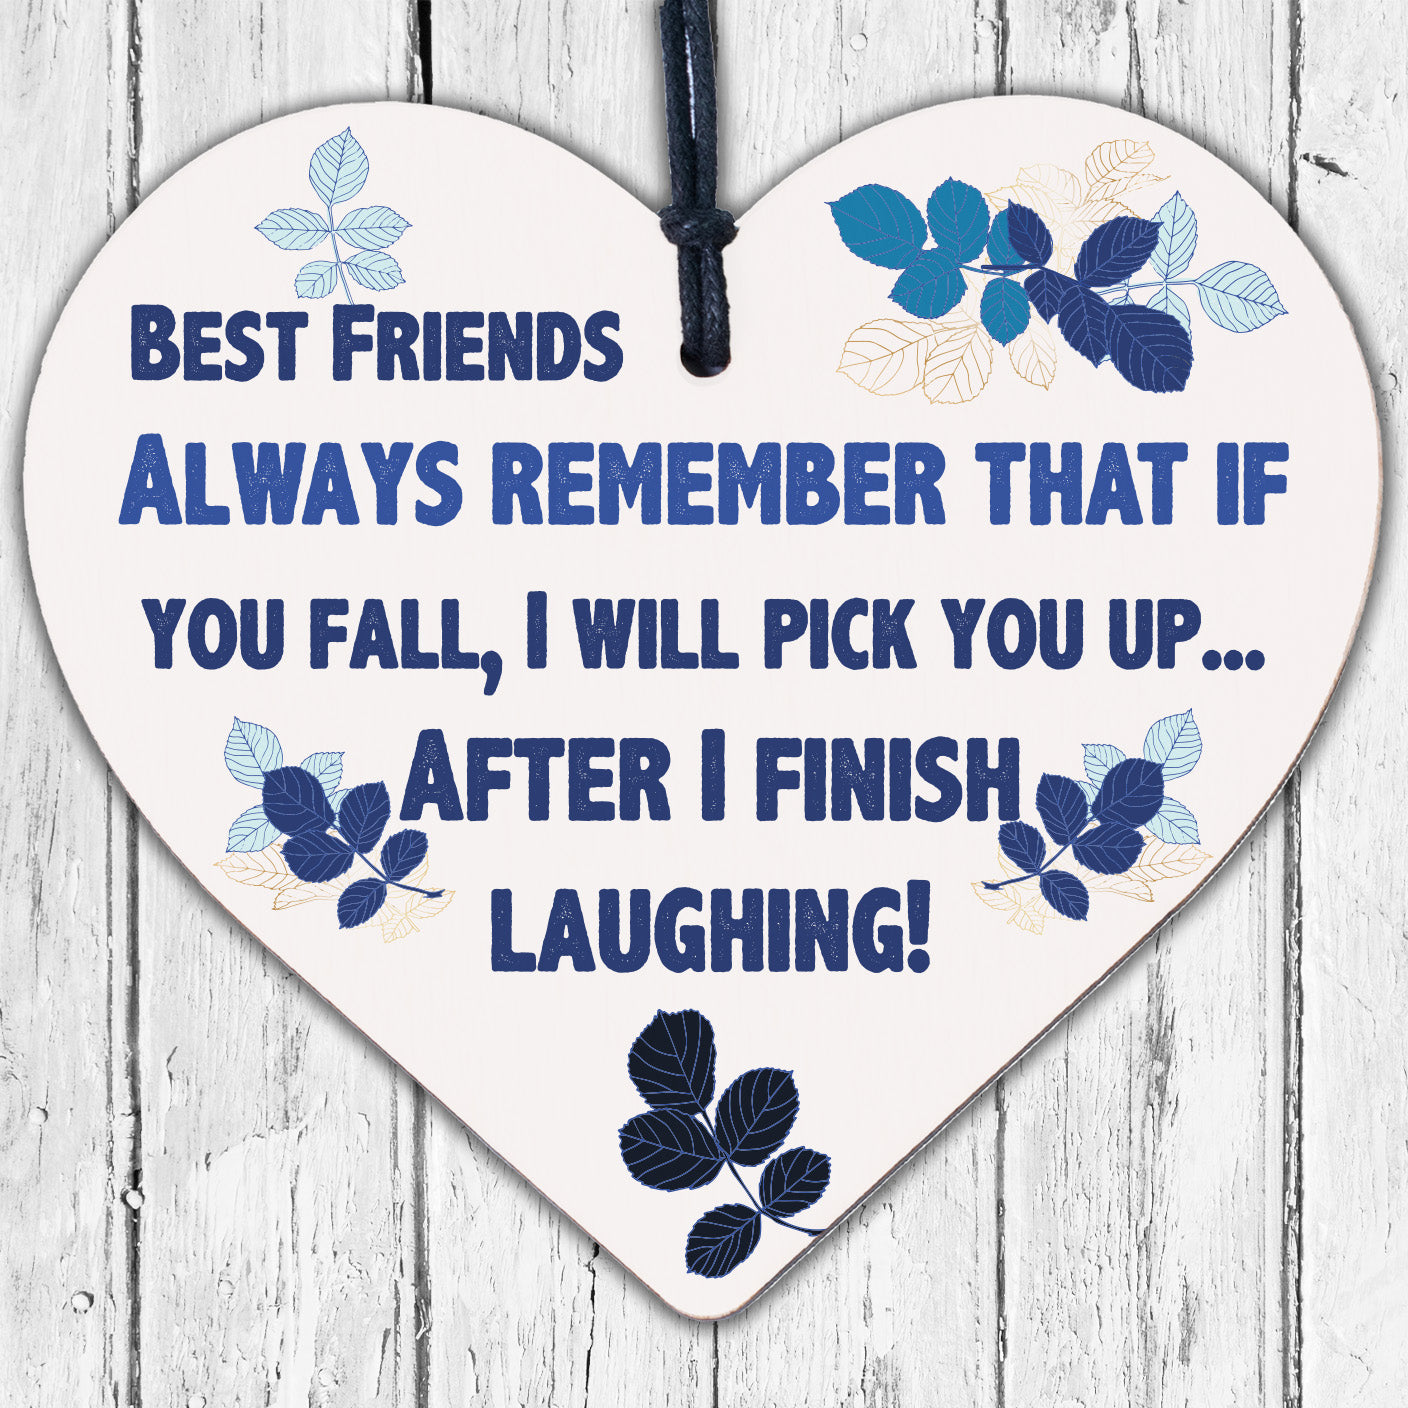 Best Friends Finish Fall Laughing Novelty Wooden Hanging Heart Friendship Plaque